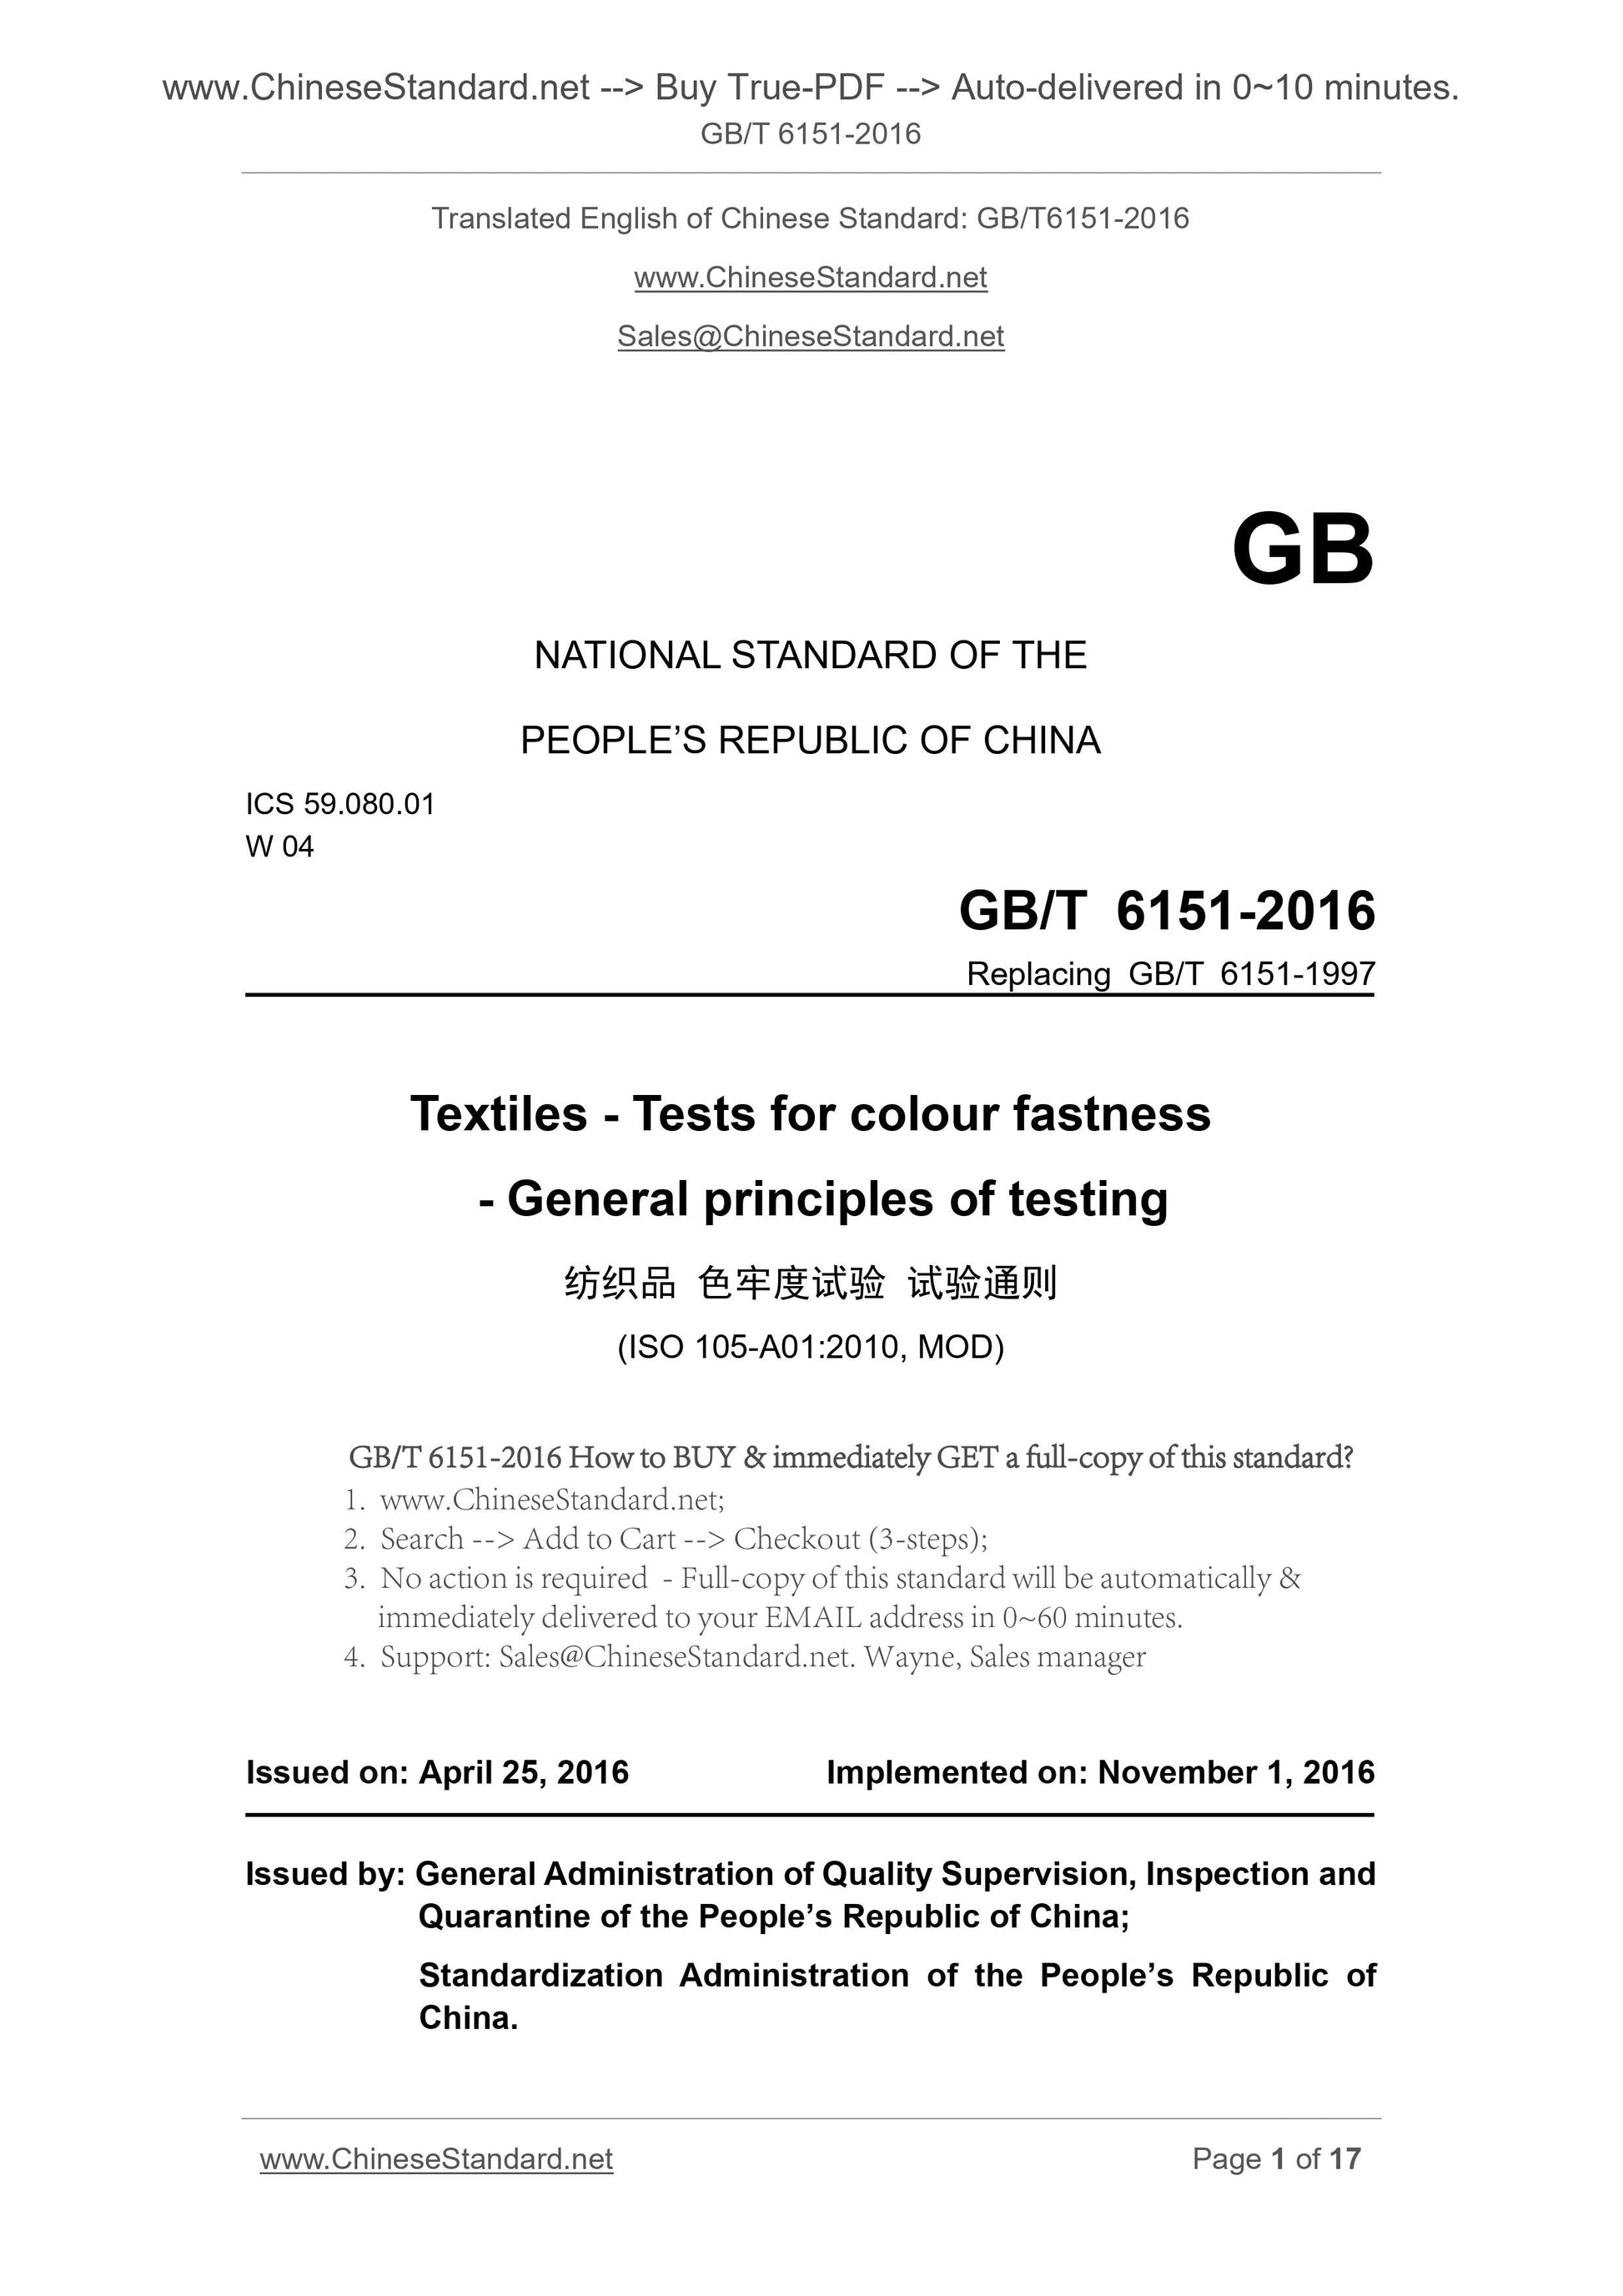 GB/T 6151-2016 Page 1